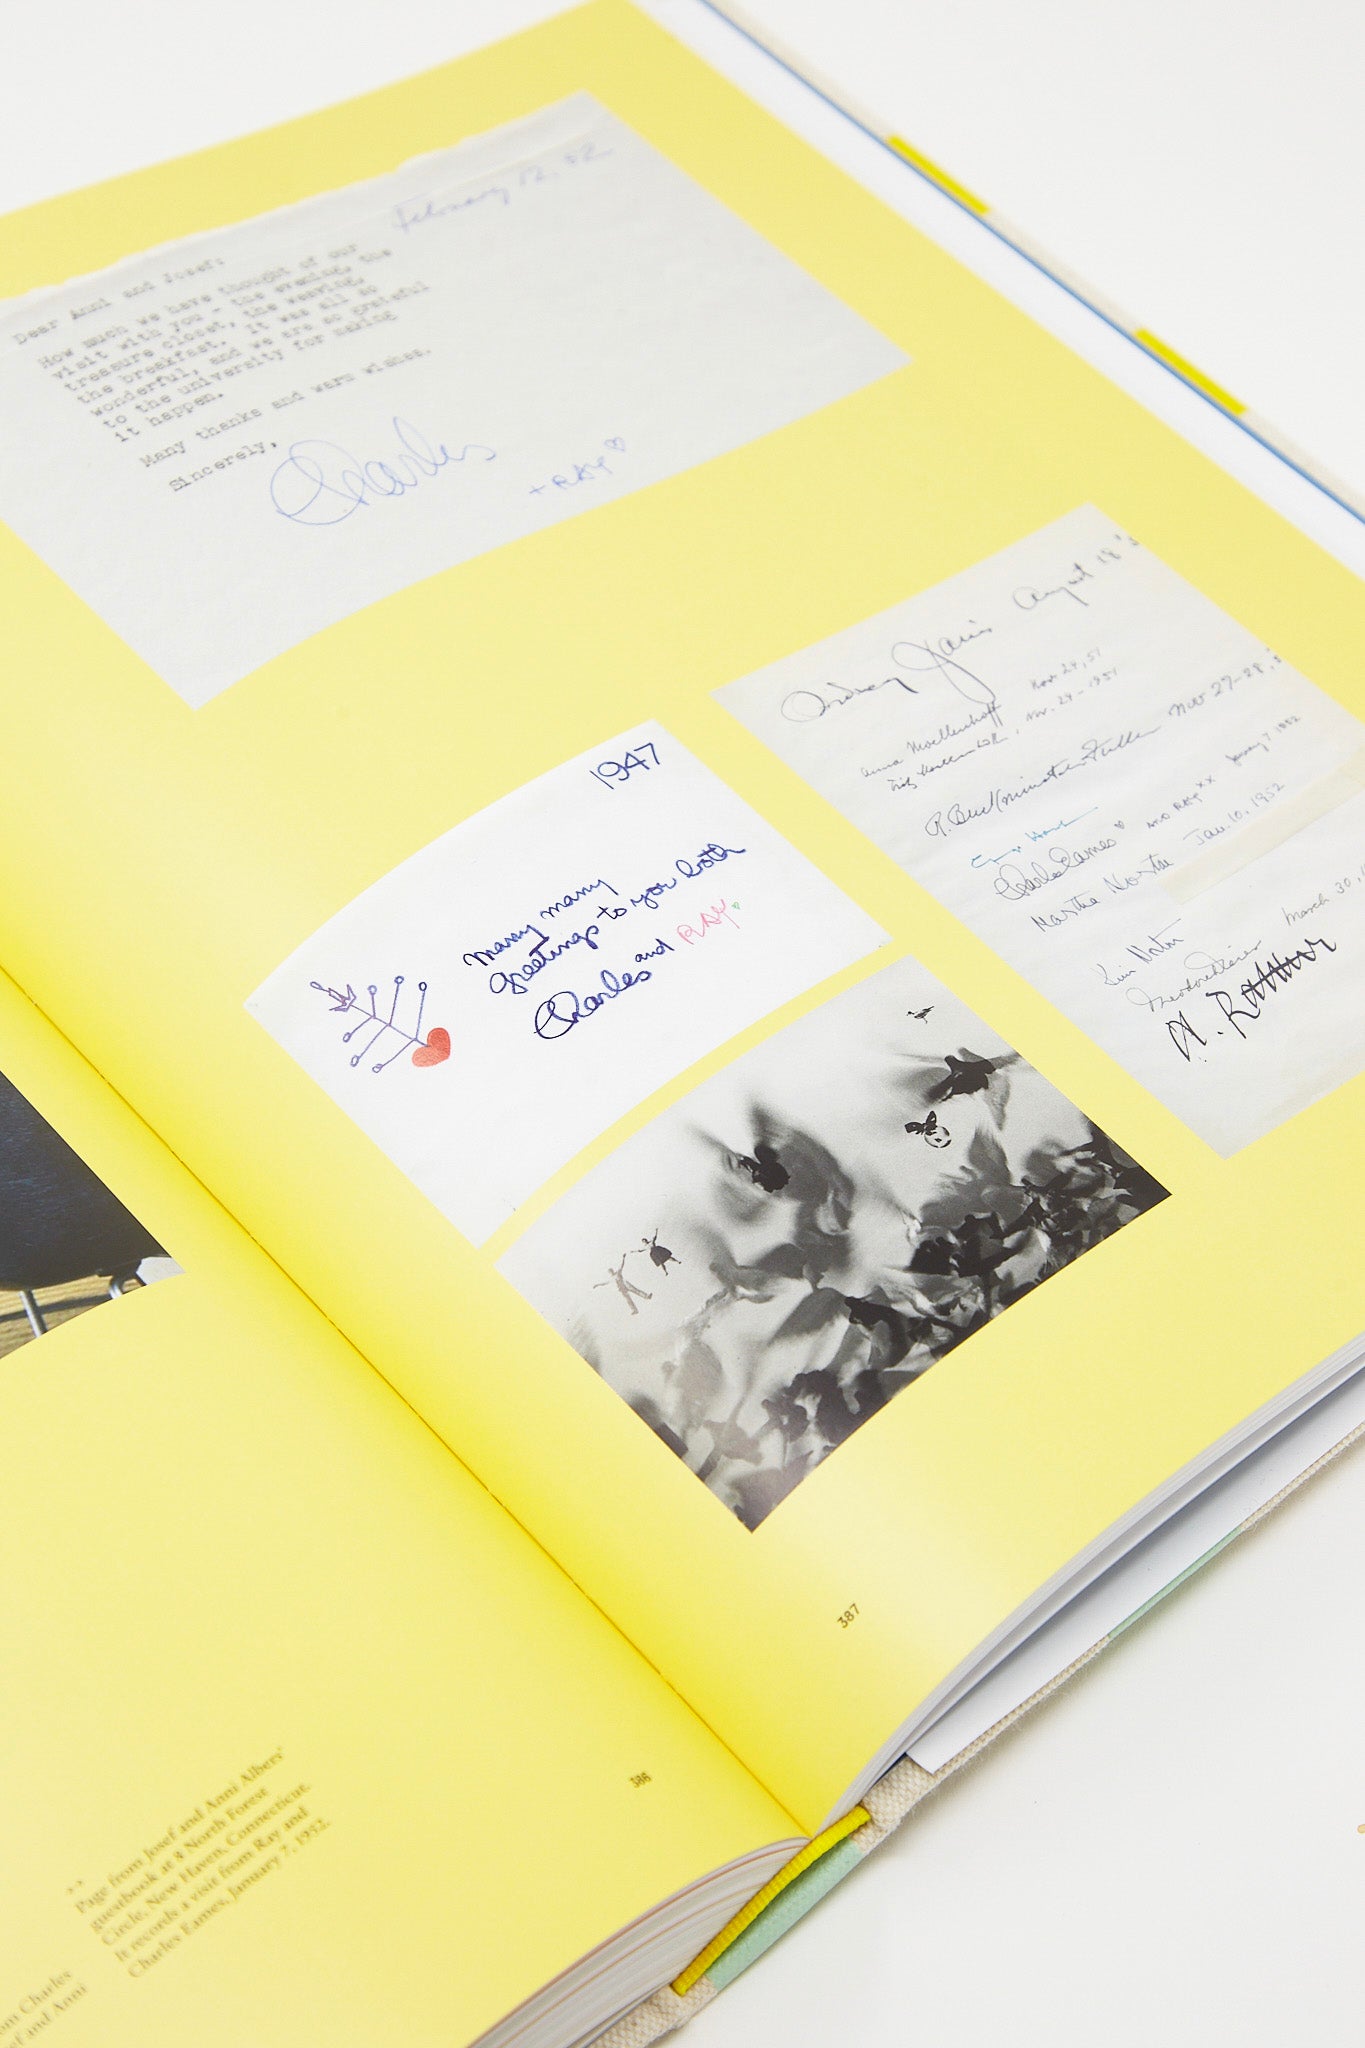 An open book with a yellow page displaying various handwritten notes and signatures, including mentions of Anni Albers, the textile artist. The product is "Anni & Josef Albers: Equal and Unequal" by Phaidon.